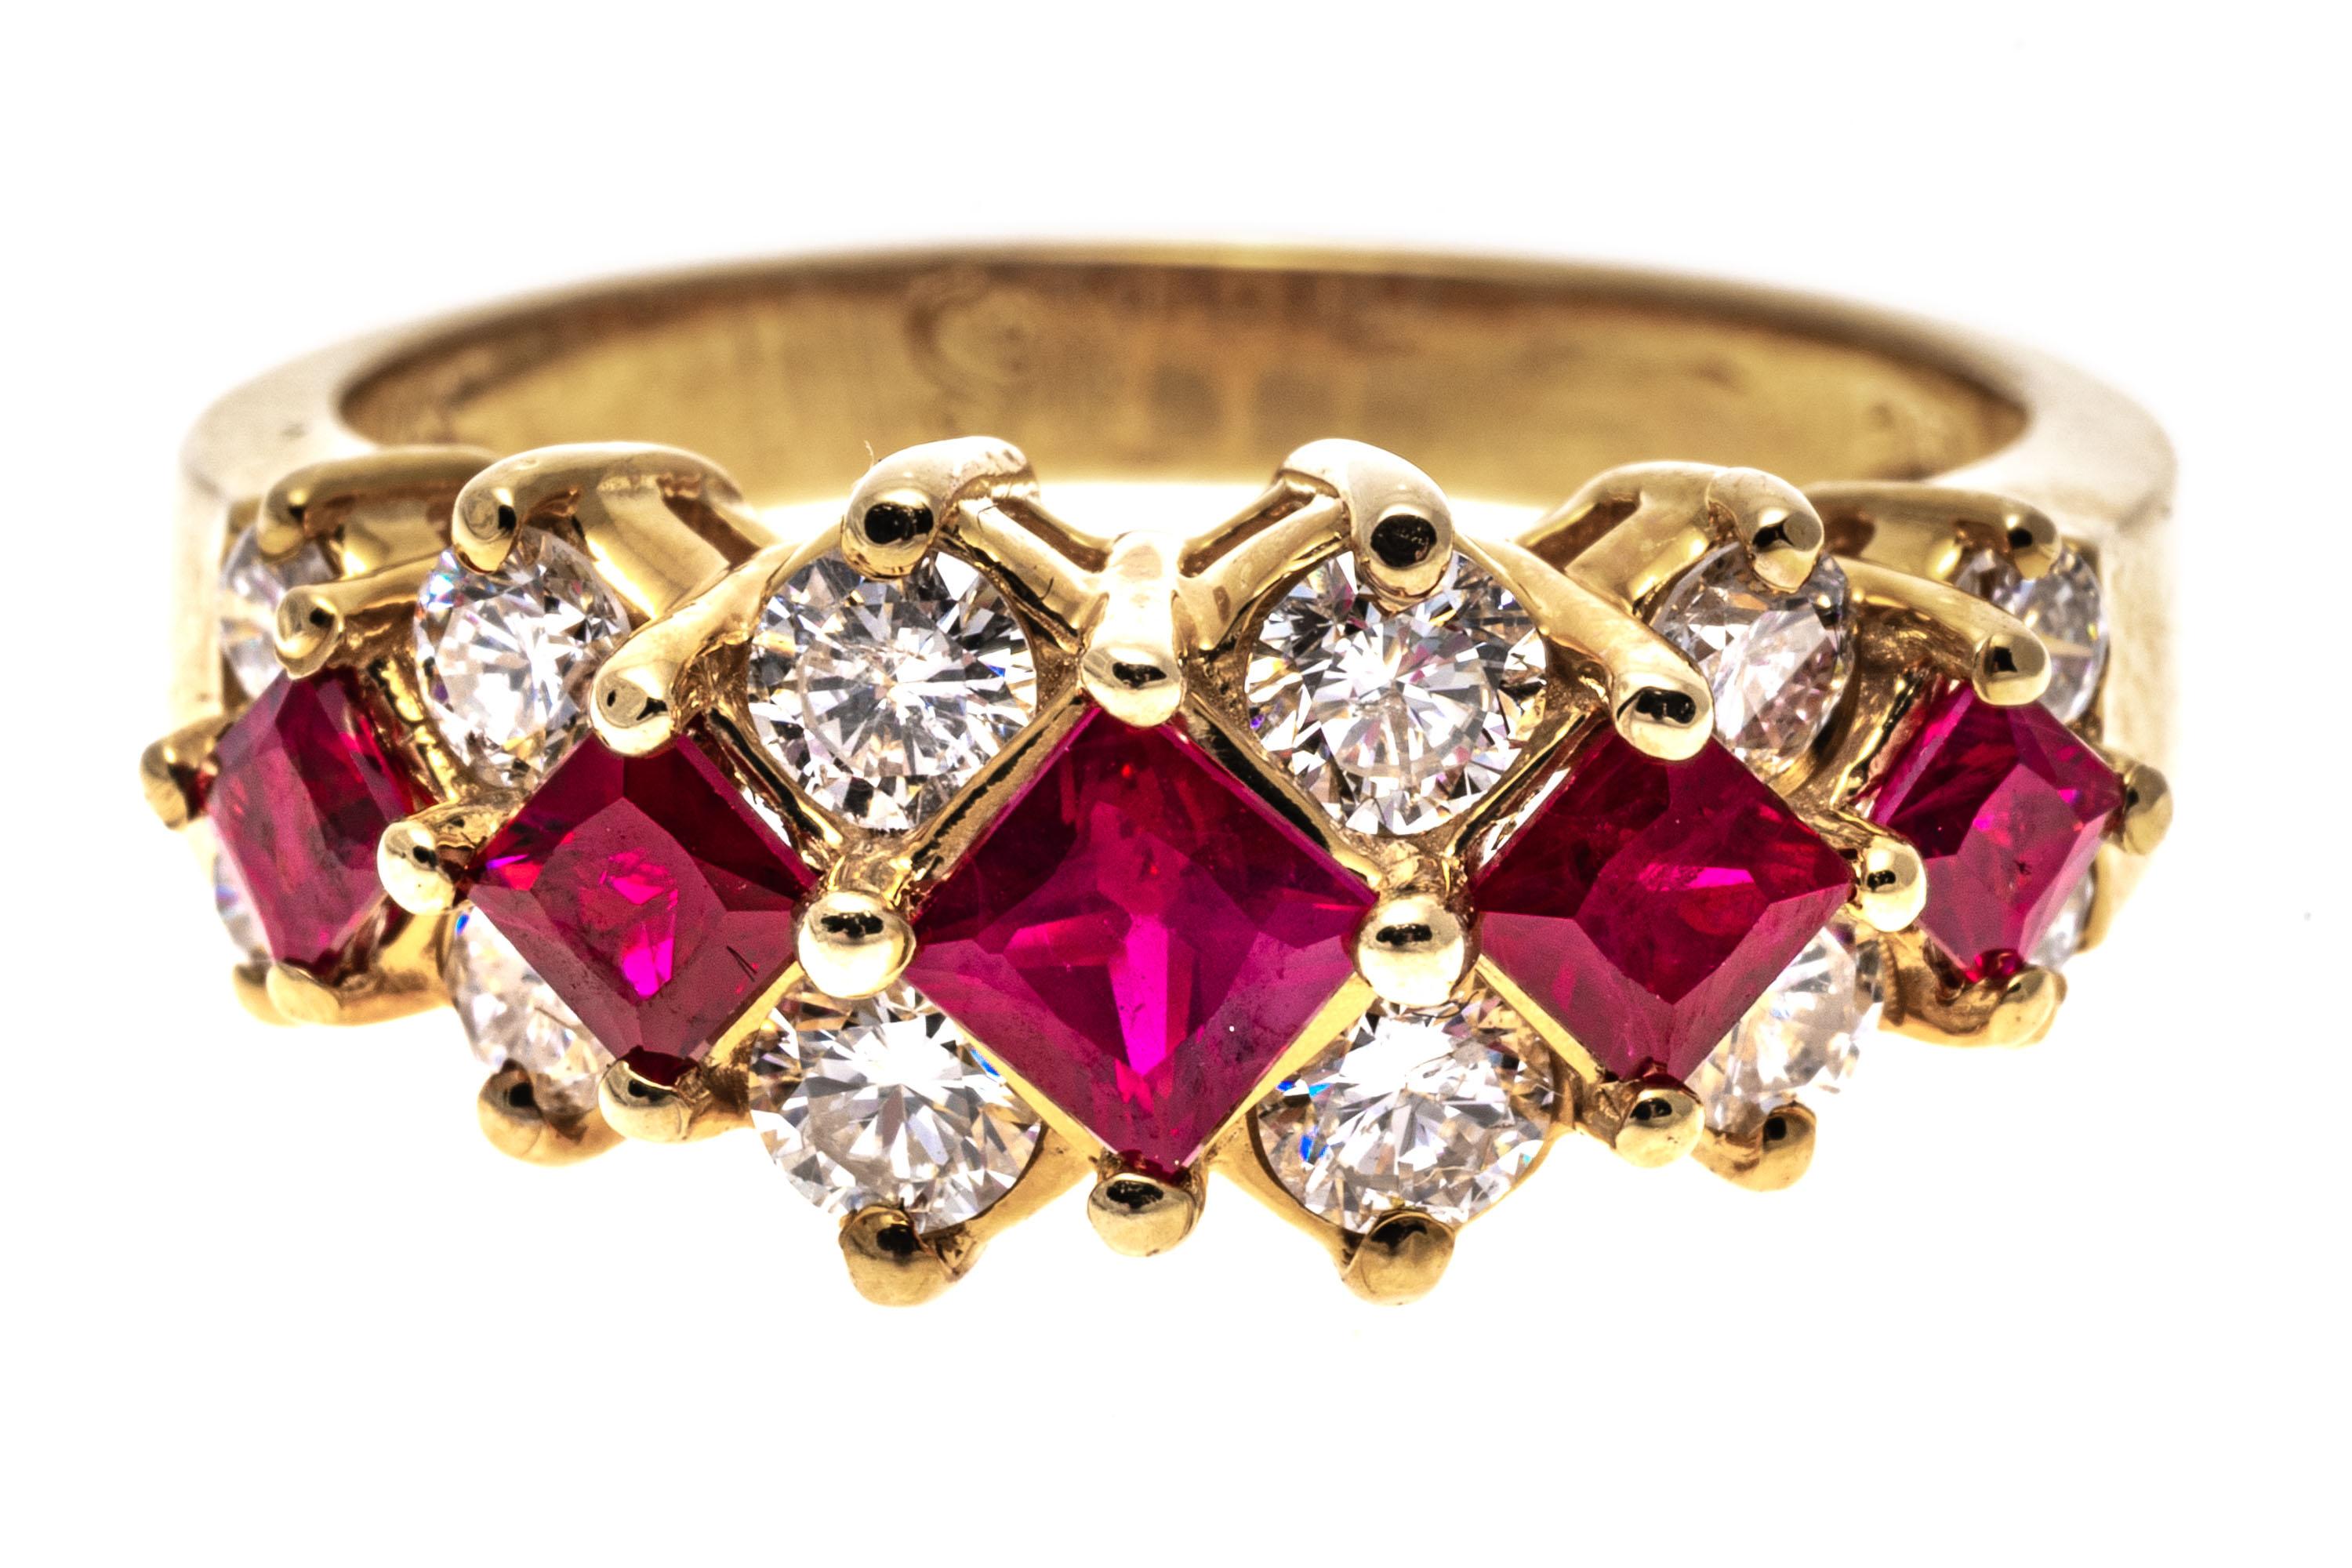 14k yellow gold ring. This stunning ring is a graduated three row band style, with a center row of square faceted, pinkish red rubies, approximately 1.88 TCW, prong set on point. Framing the rubies is a row of round brilliant cut diamonds,